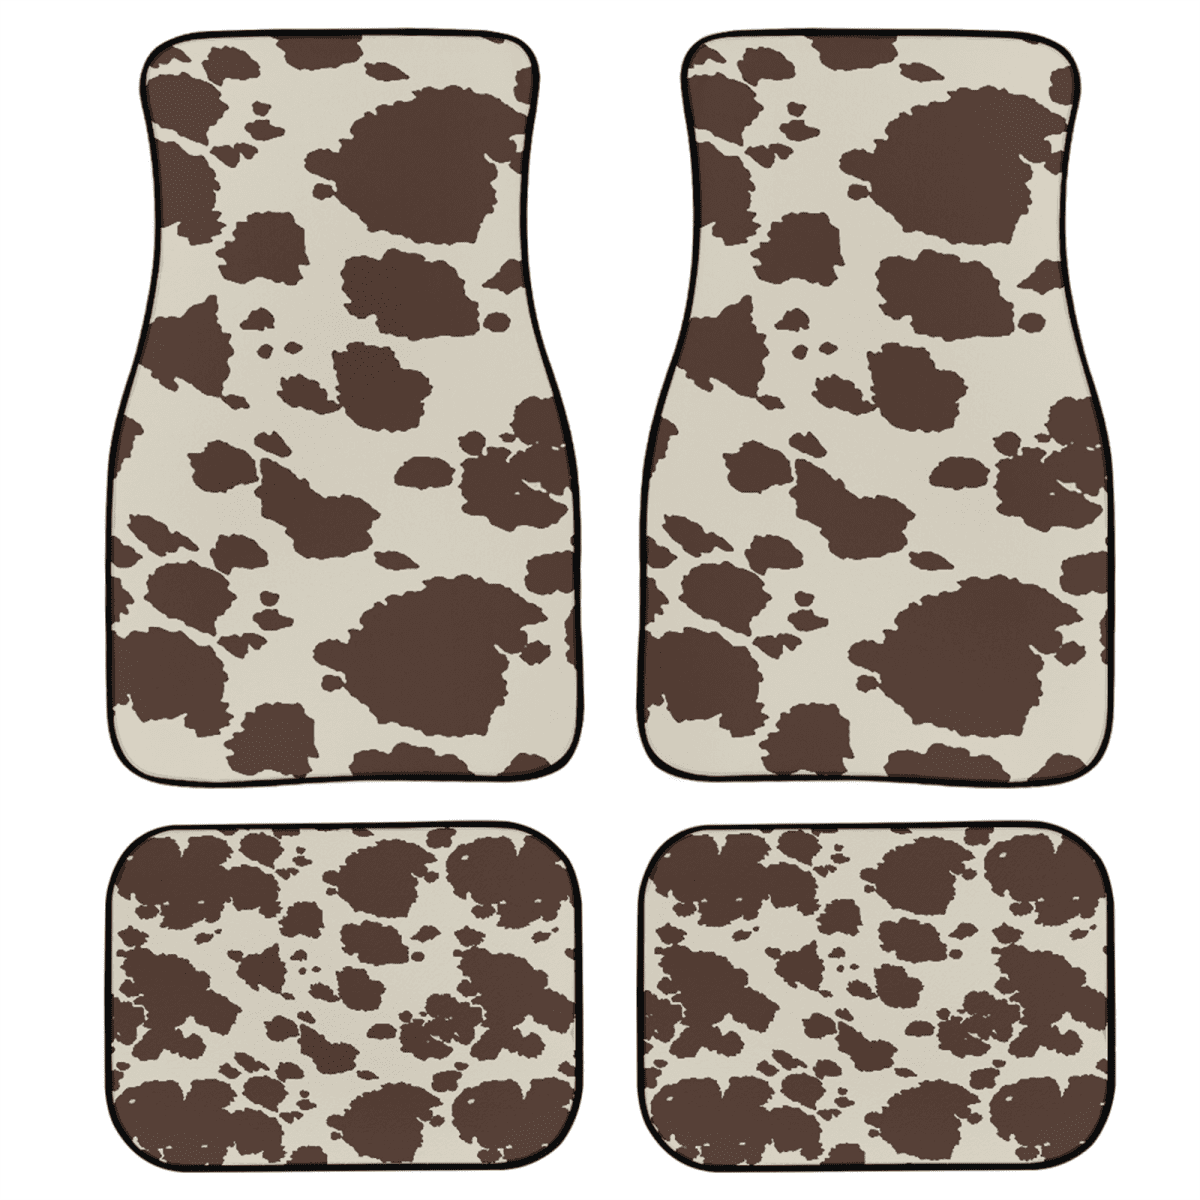 FKELYI 4 Pieces Camouflage Hunting Skull Deer Car Floor Mats for